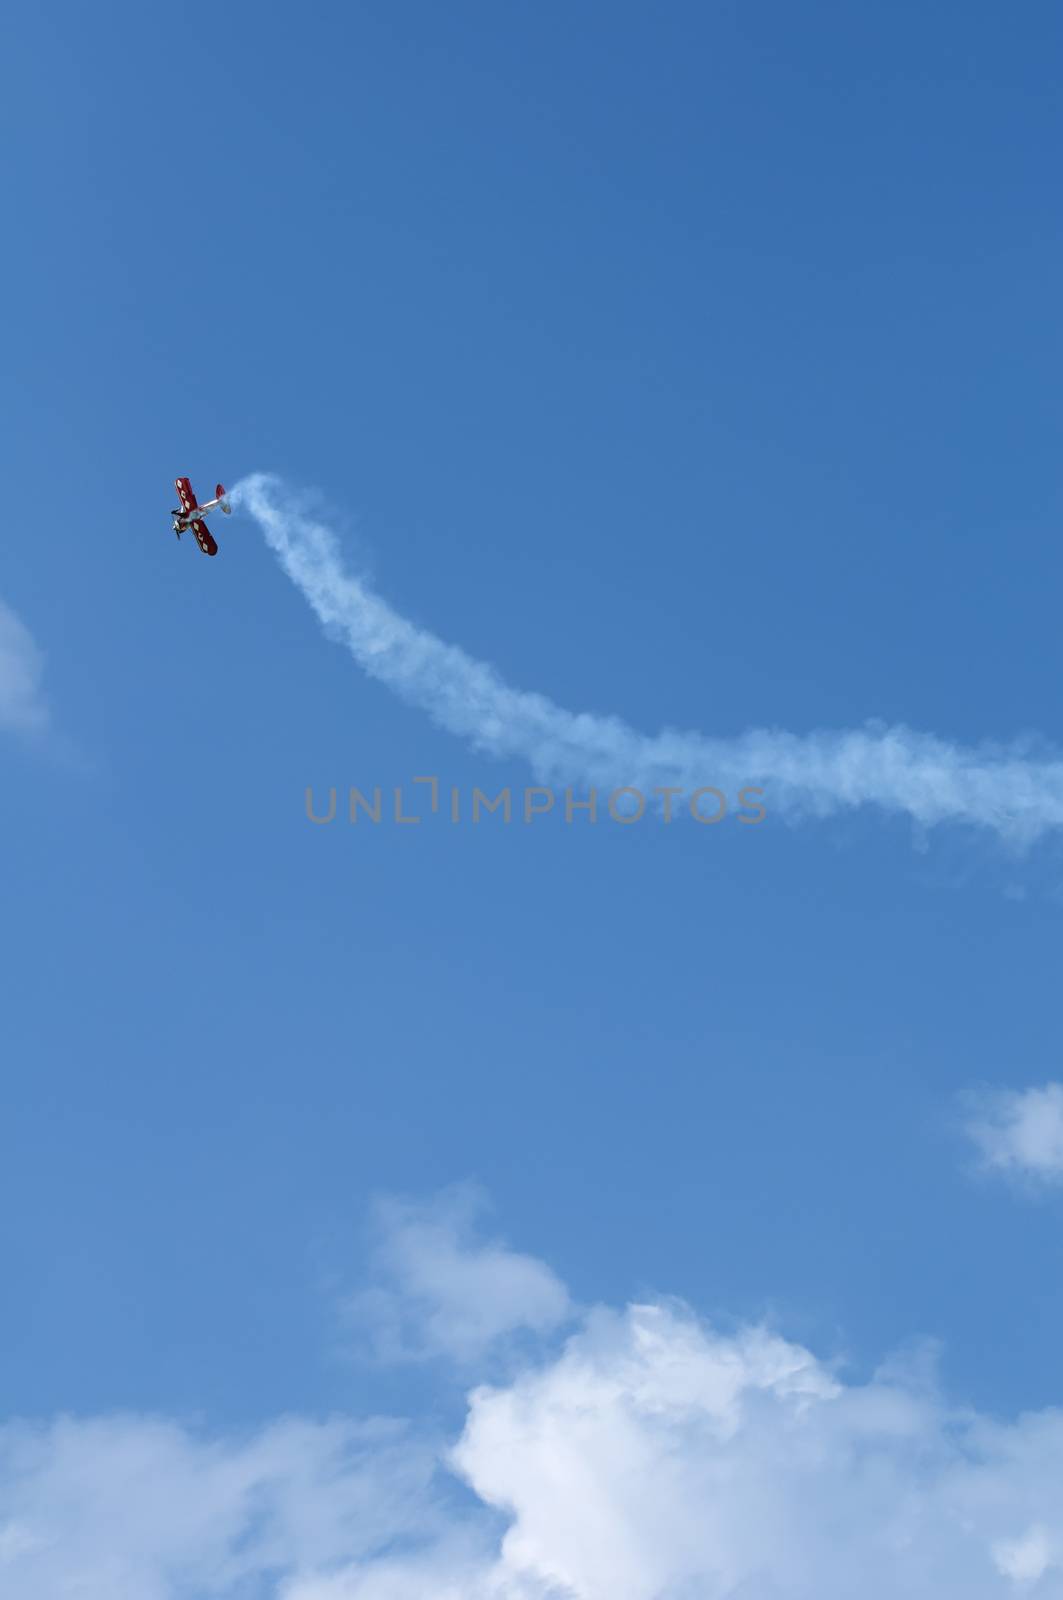 Plane doing Loops on blue cloudy sky